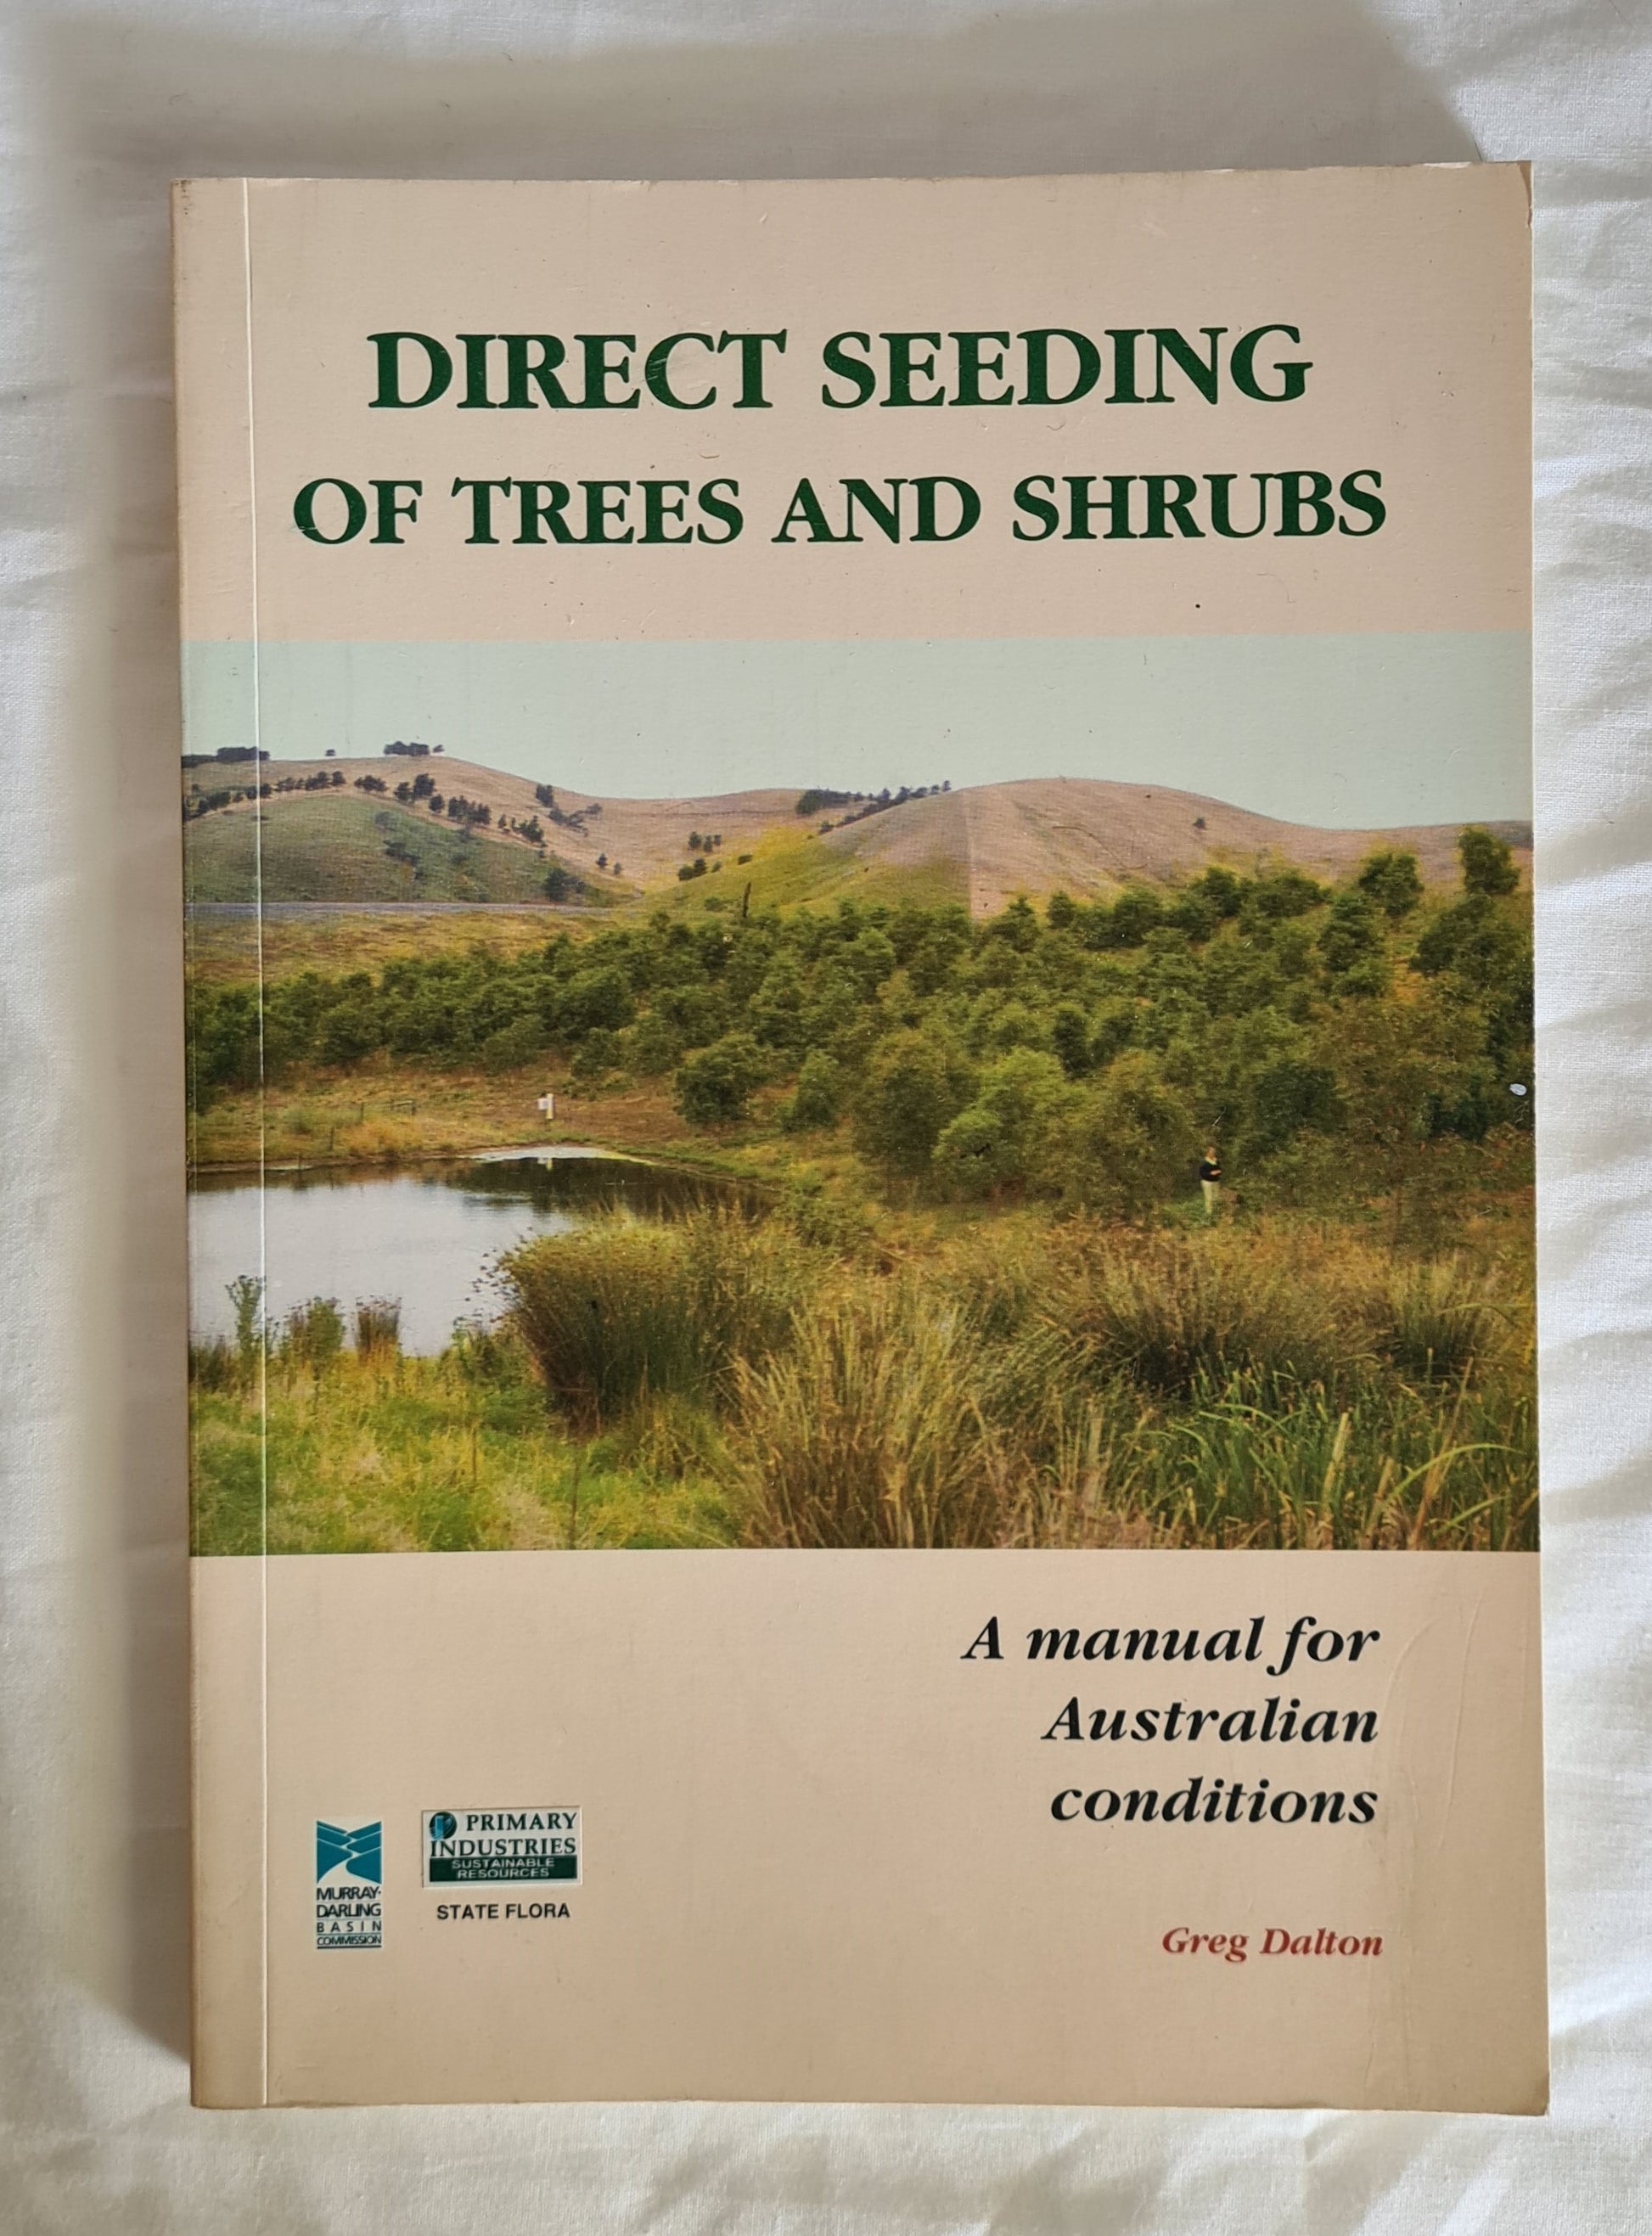 Direct Seeding of Trees and Shrubs  A manual for Australian conditions  by Greg Dalton